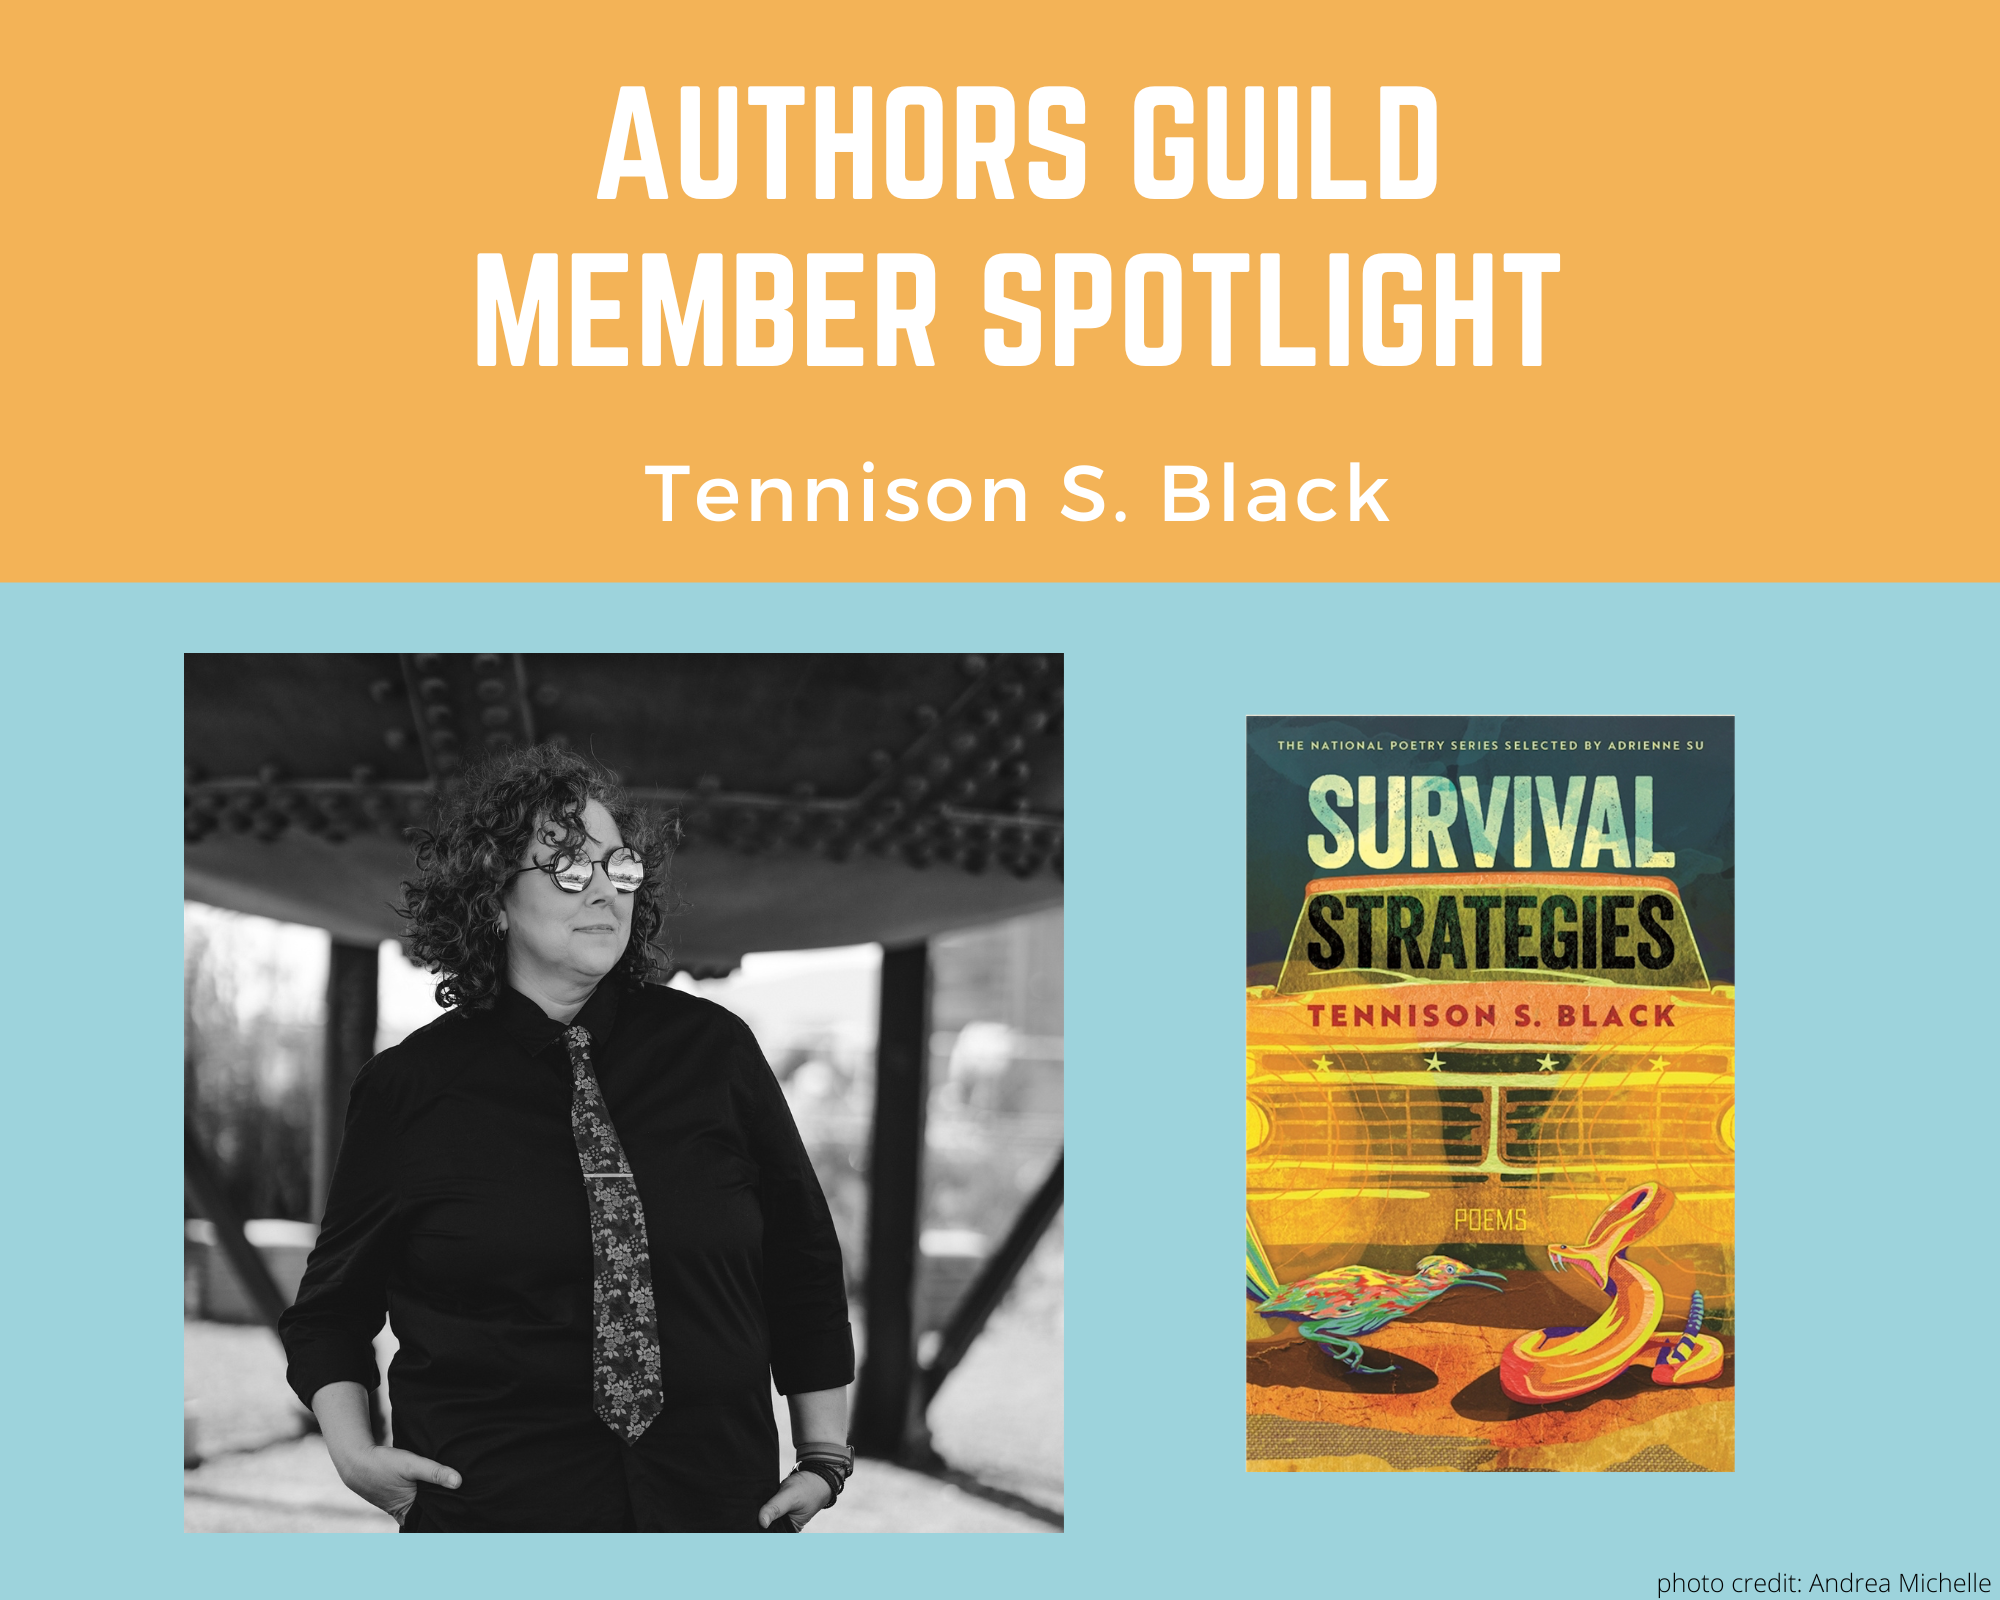 author Tennison S. Black and an image of their book Survival Strategies